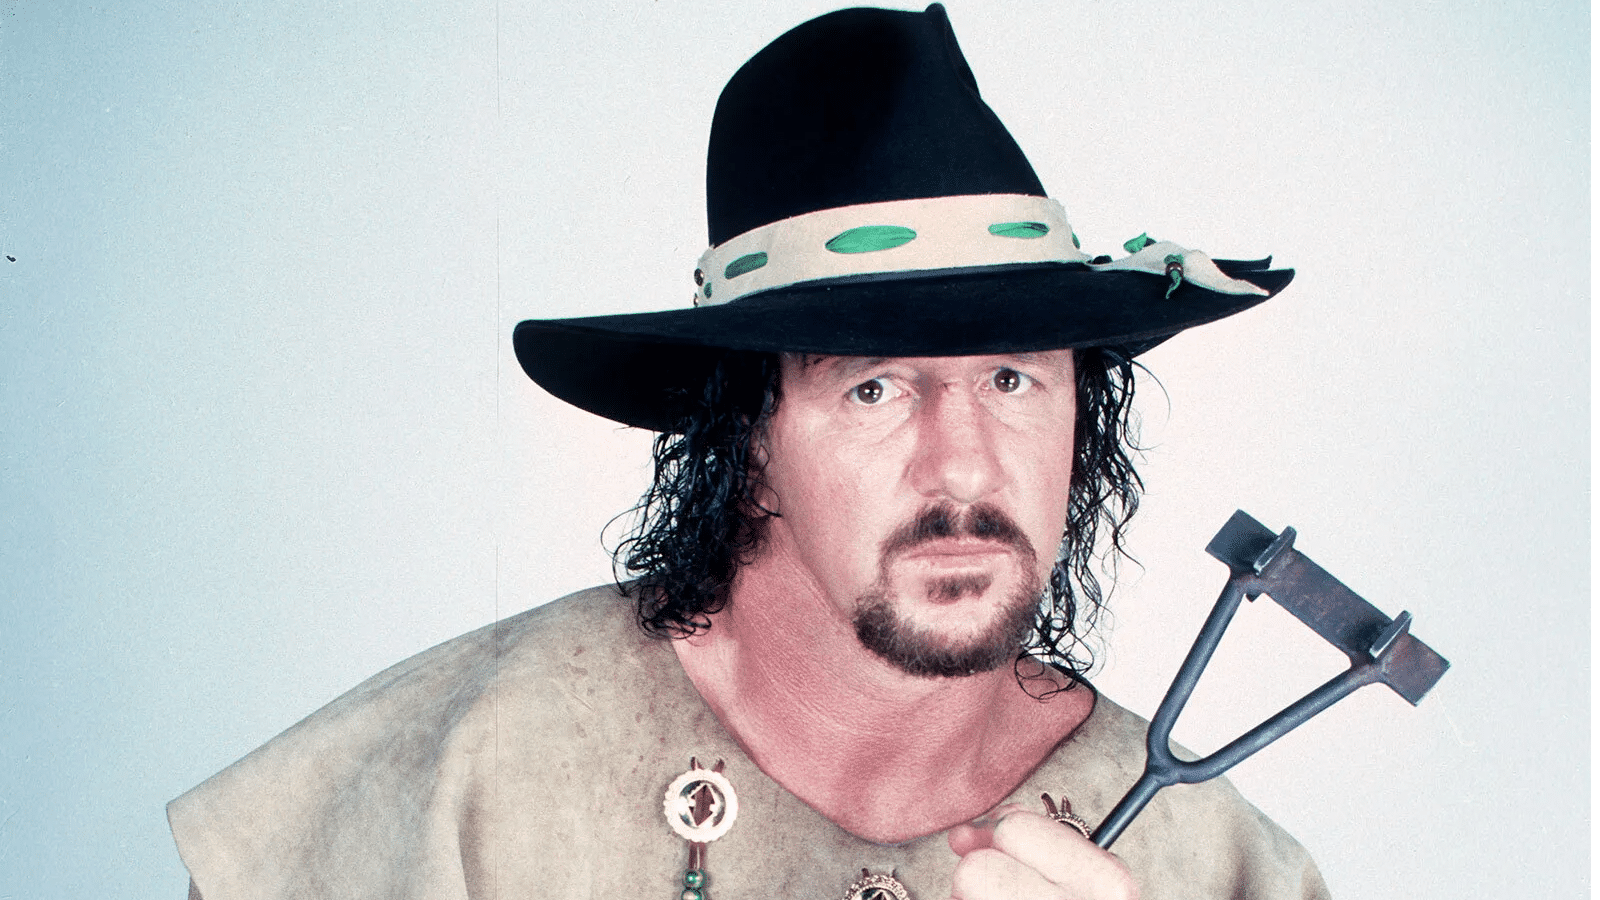 WWE Legend Terry Funk battling dementia, currently in assisted living facility